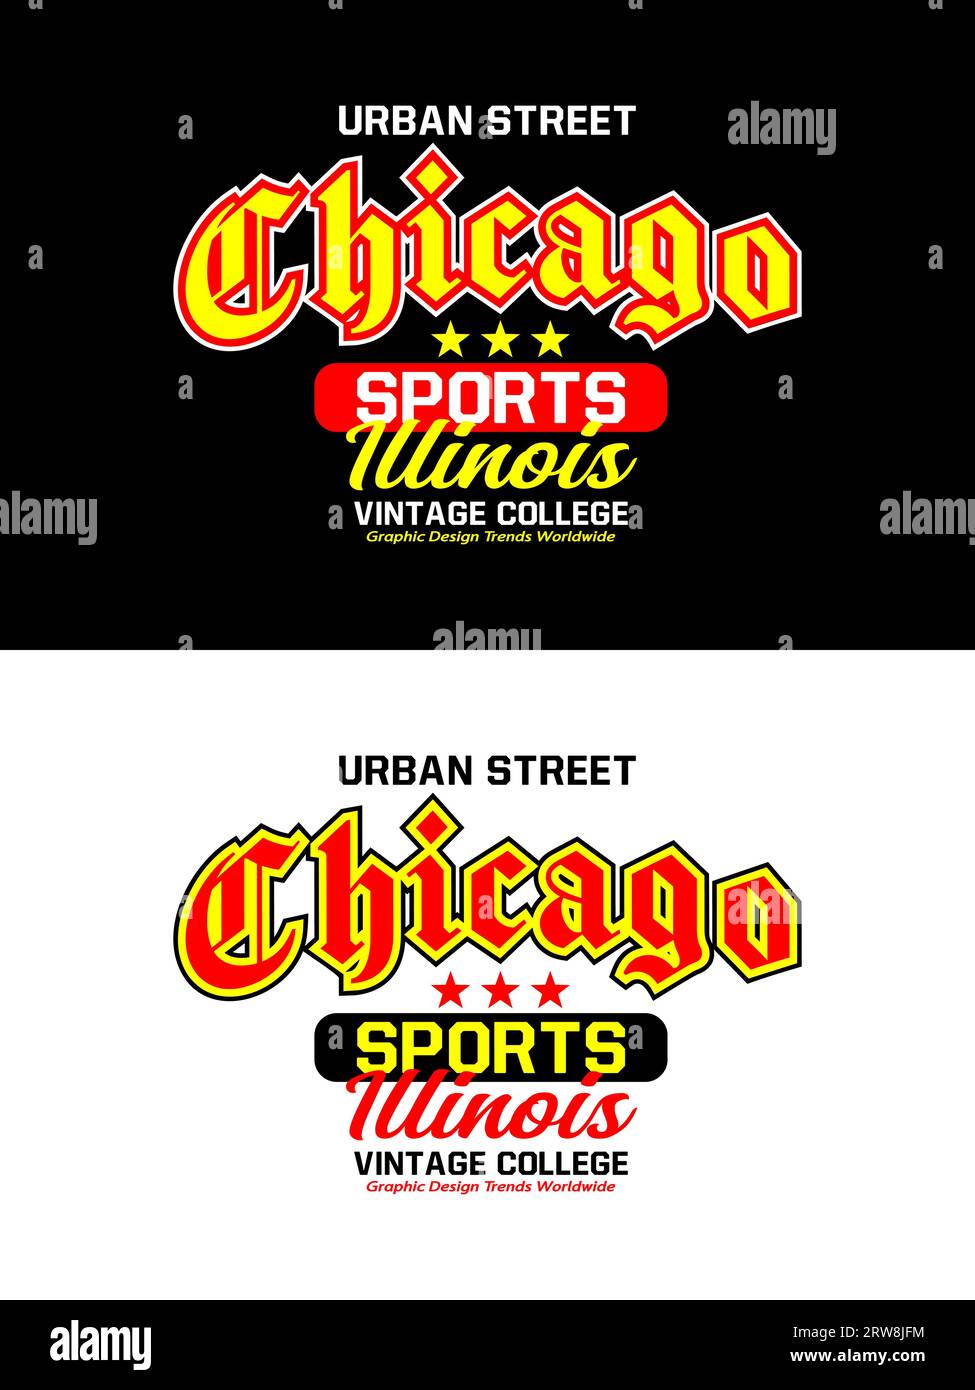 Chicago vintage college varsity design, graphic typography for t-shirt, posters, labels, etc. Stock Vector